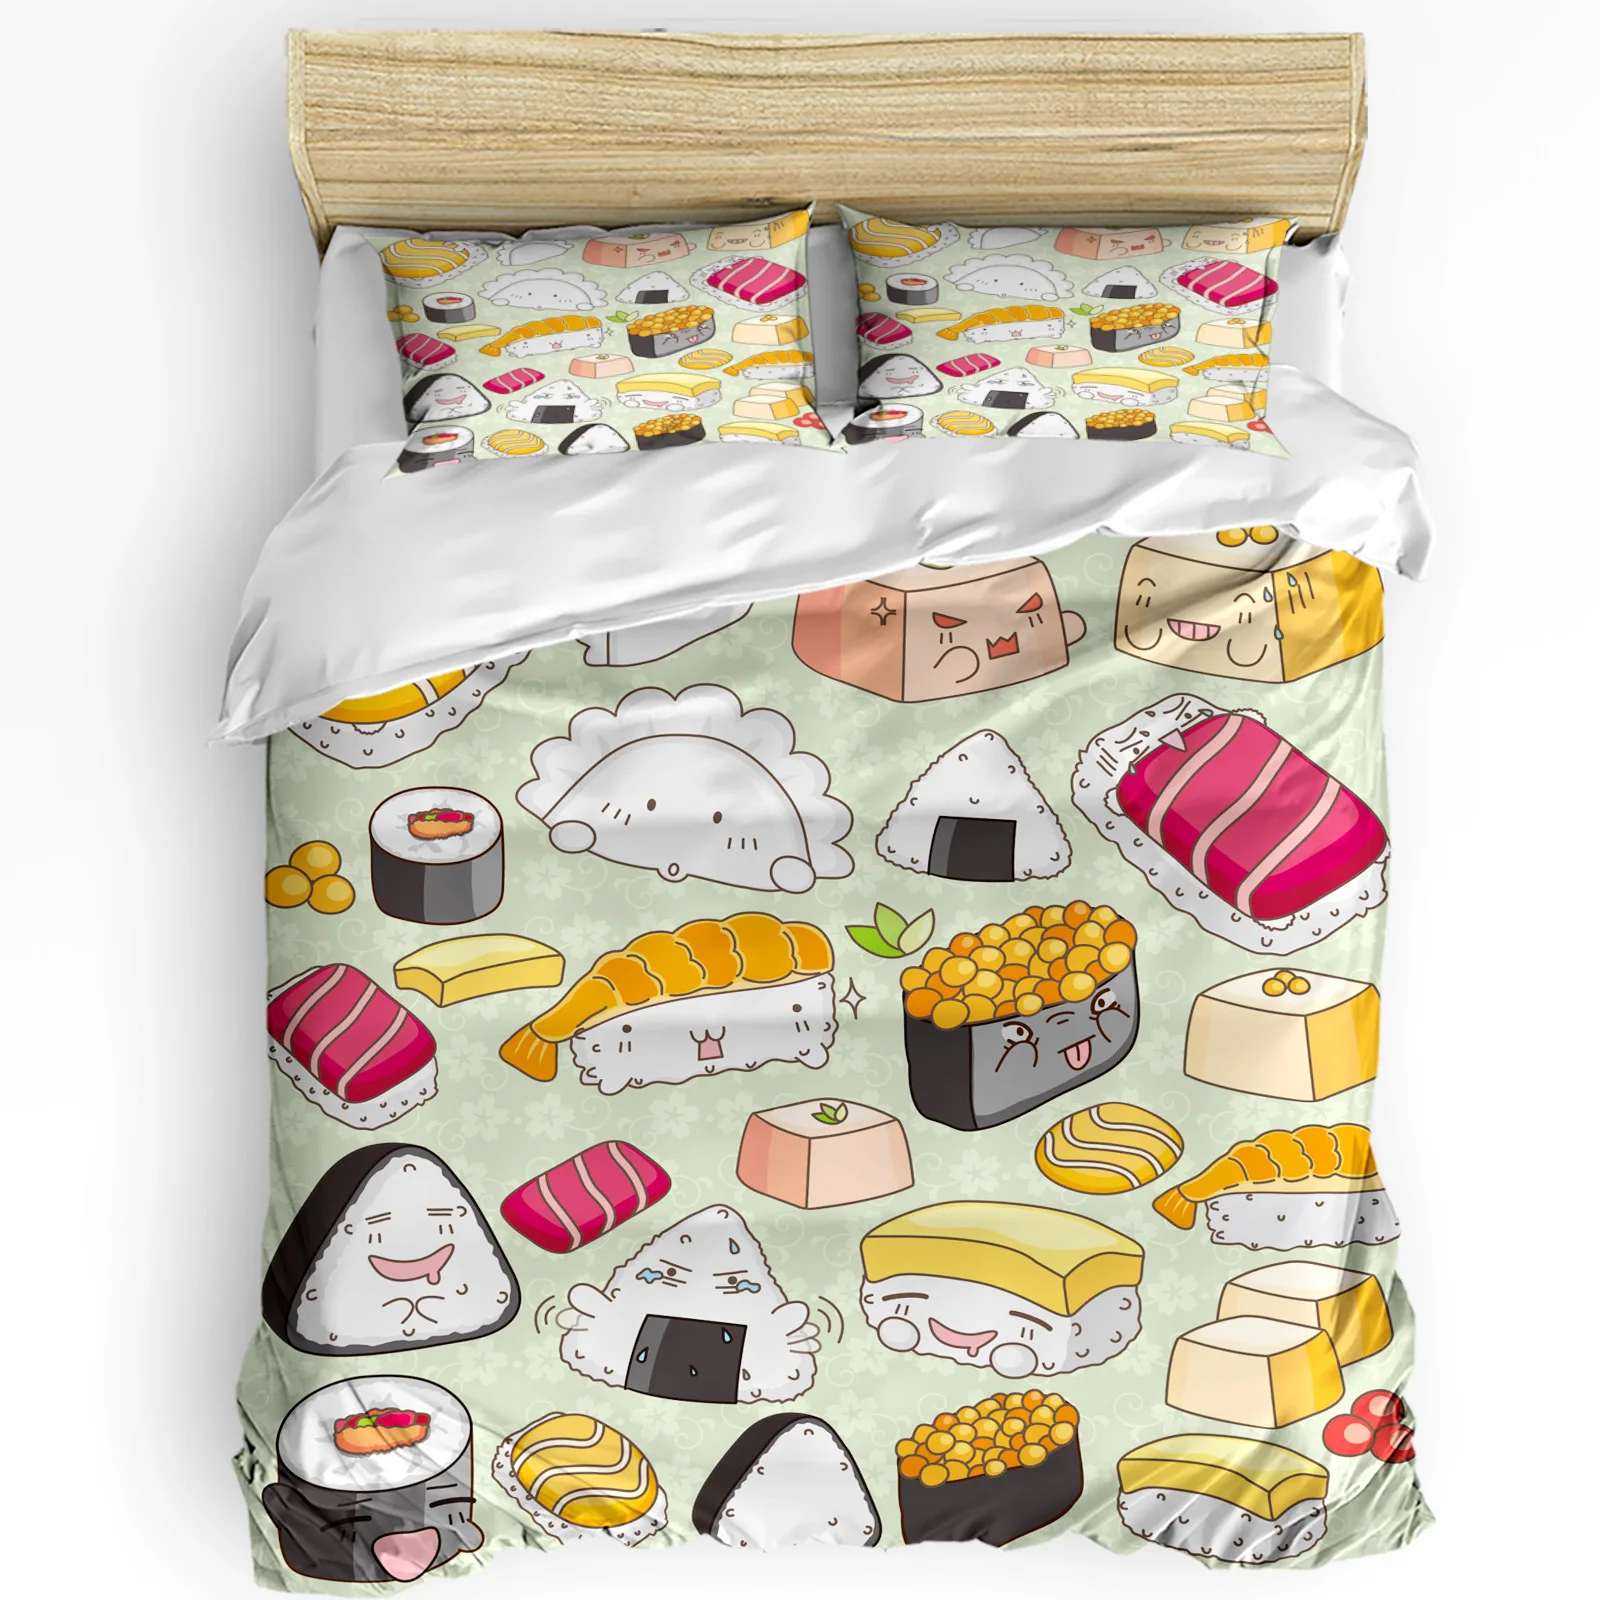 

Sushi Cartoon Japanese Culture Delicious Food 3pcs Bedding Set For Double Bed Home Textile Duvet Cover Quilt Cover Pillowcase